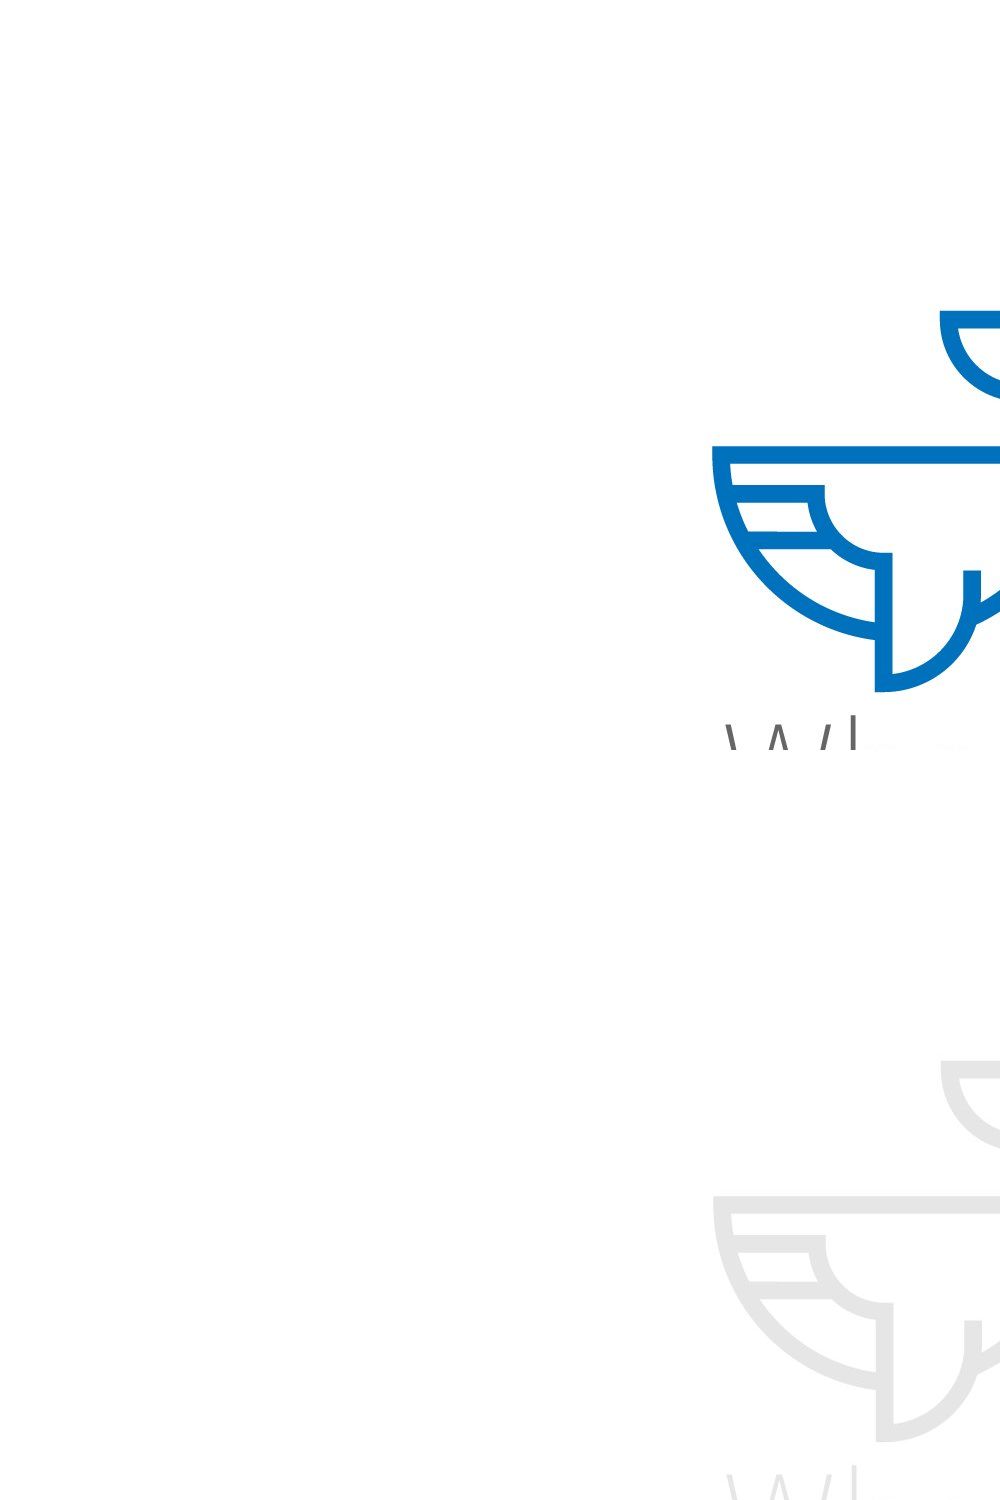 Whale logo pinterest preview image.